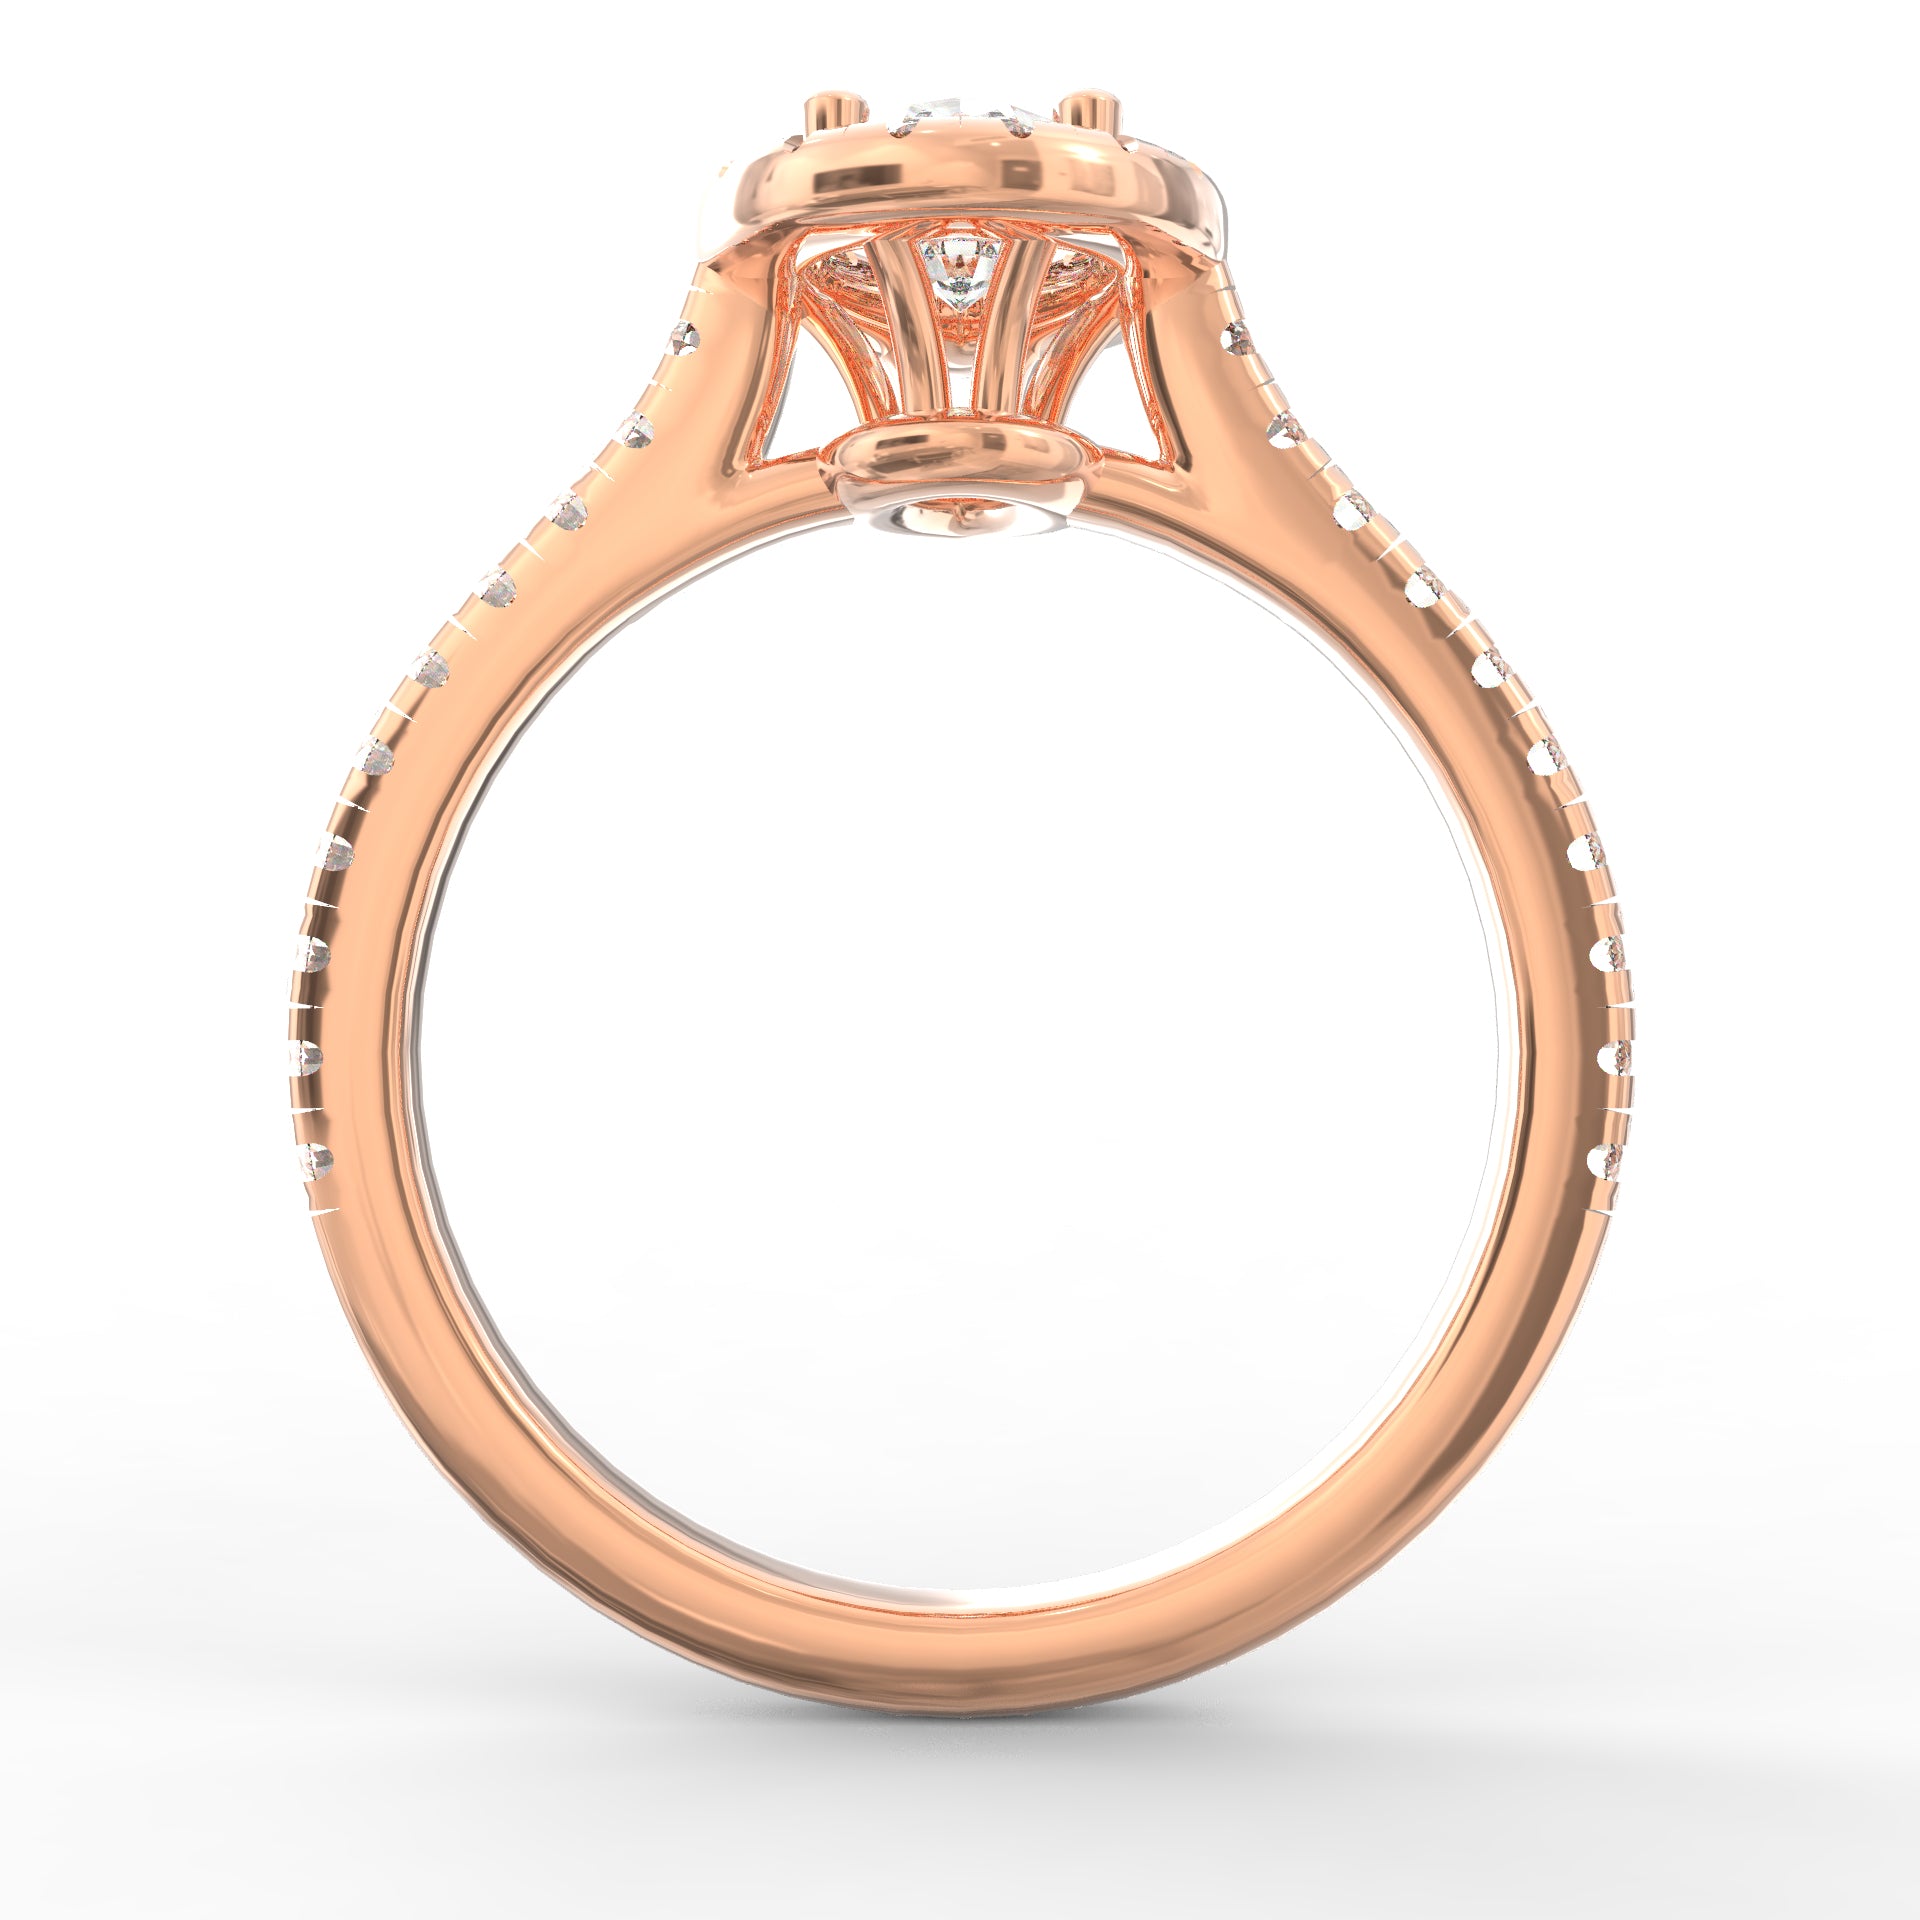 Best Dream Engagement Rings To Buy Online For A Chic Look